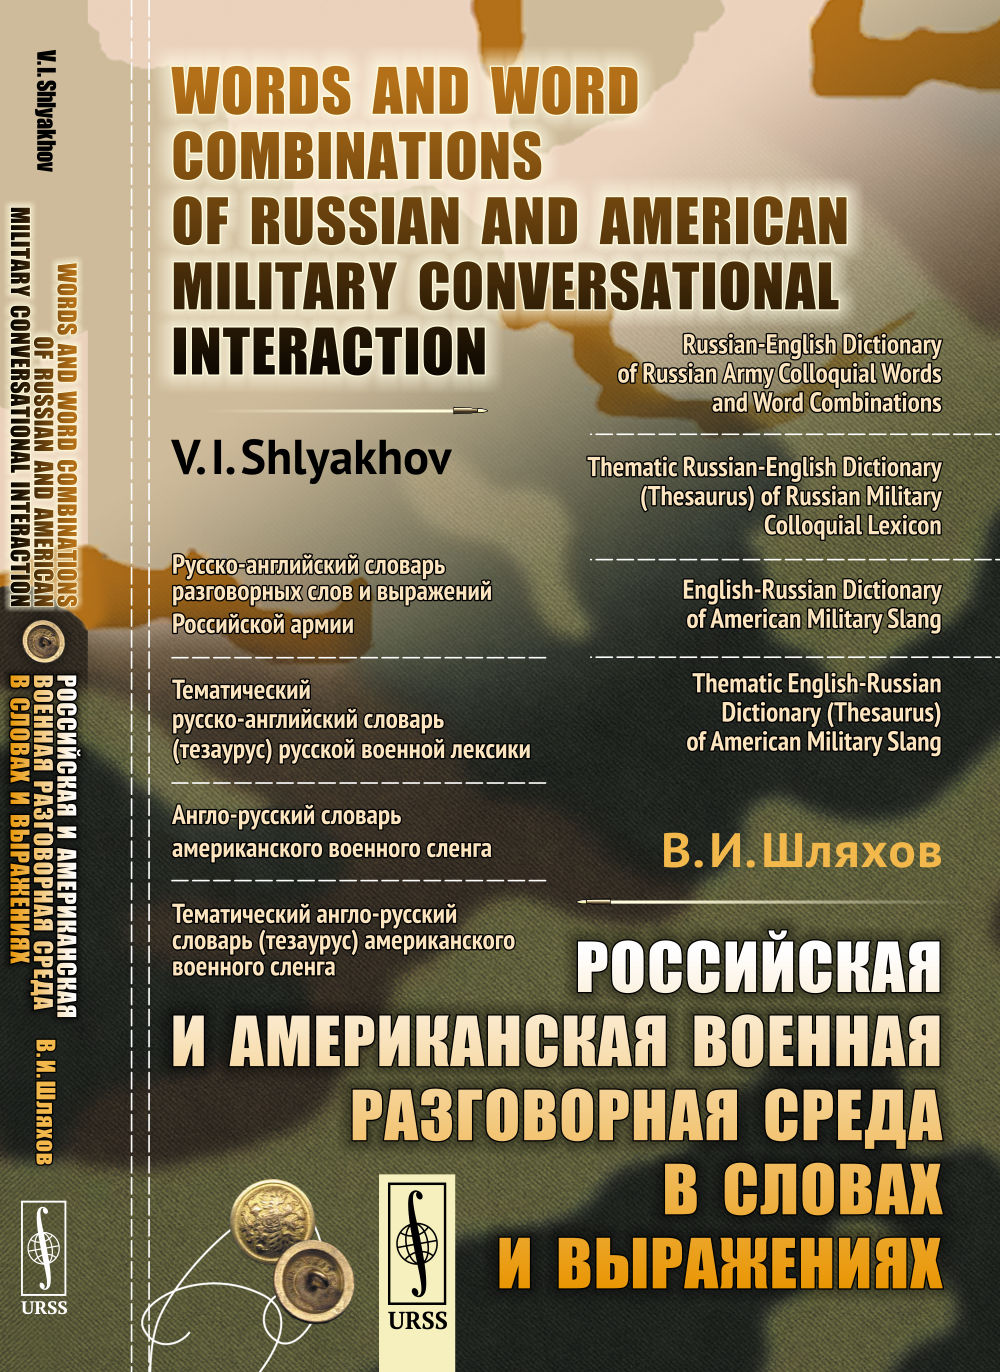           // Words and Word Combinations of Russian and American Military Conversational Interaction